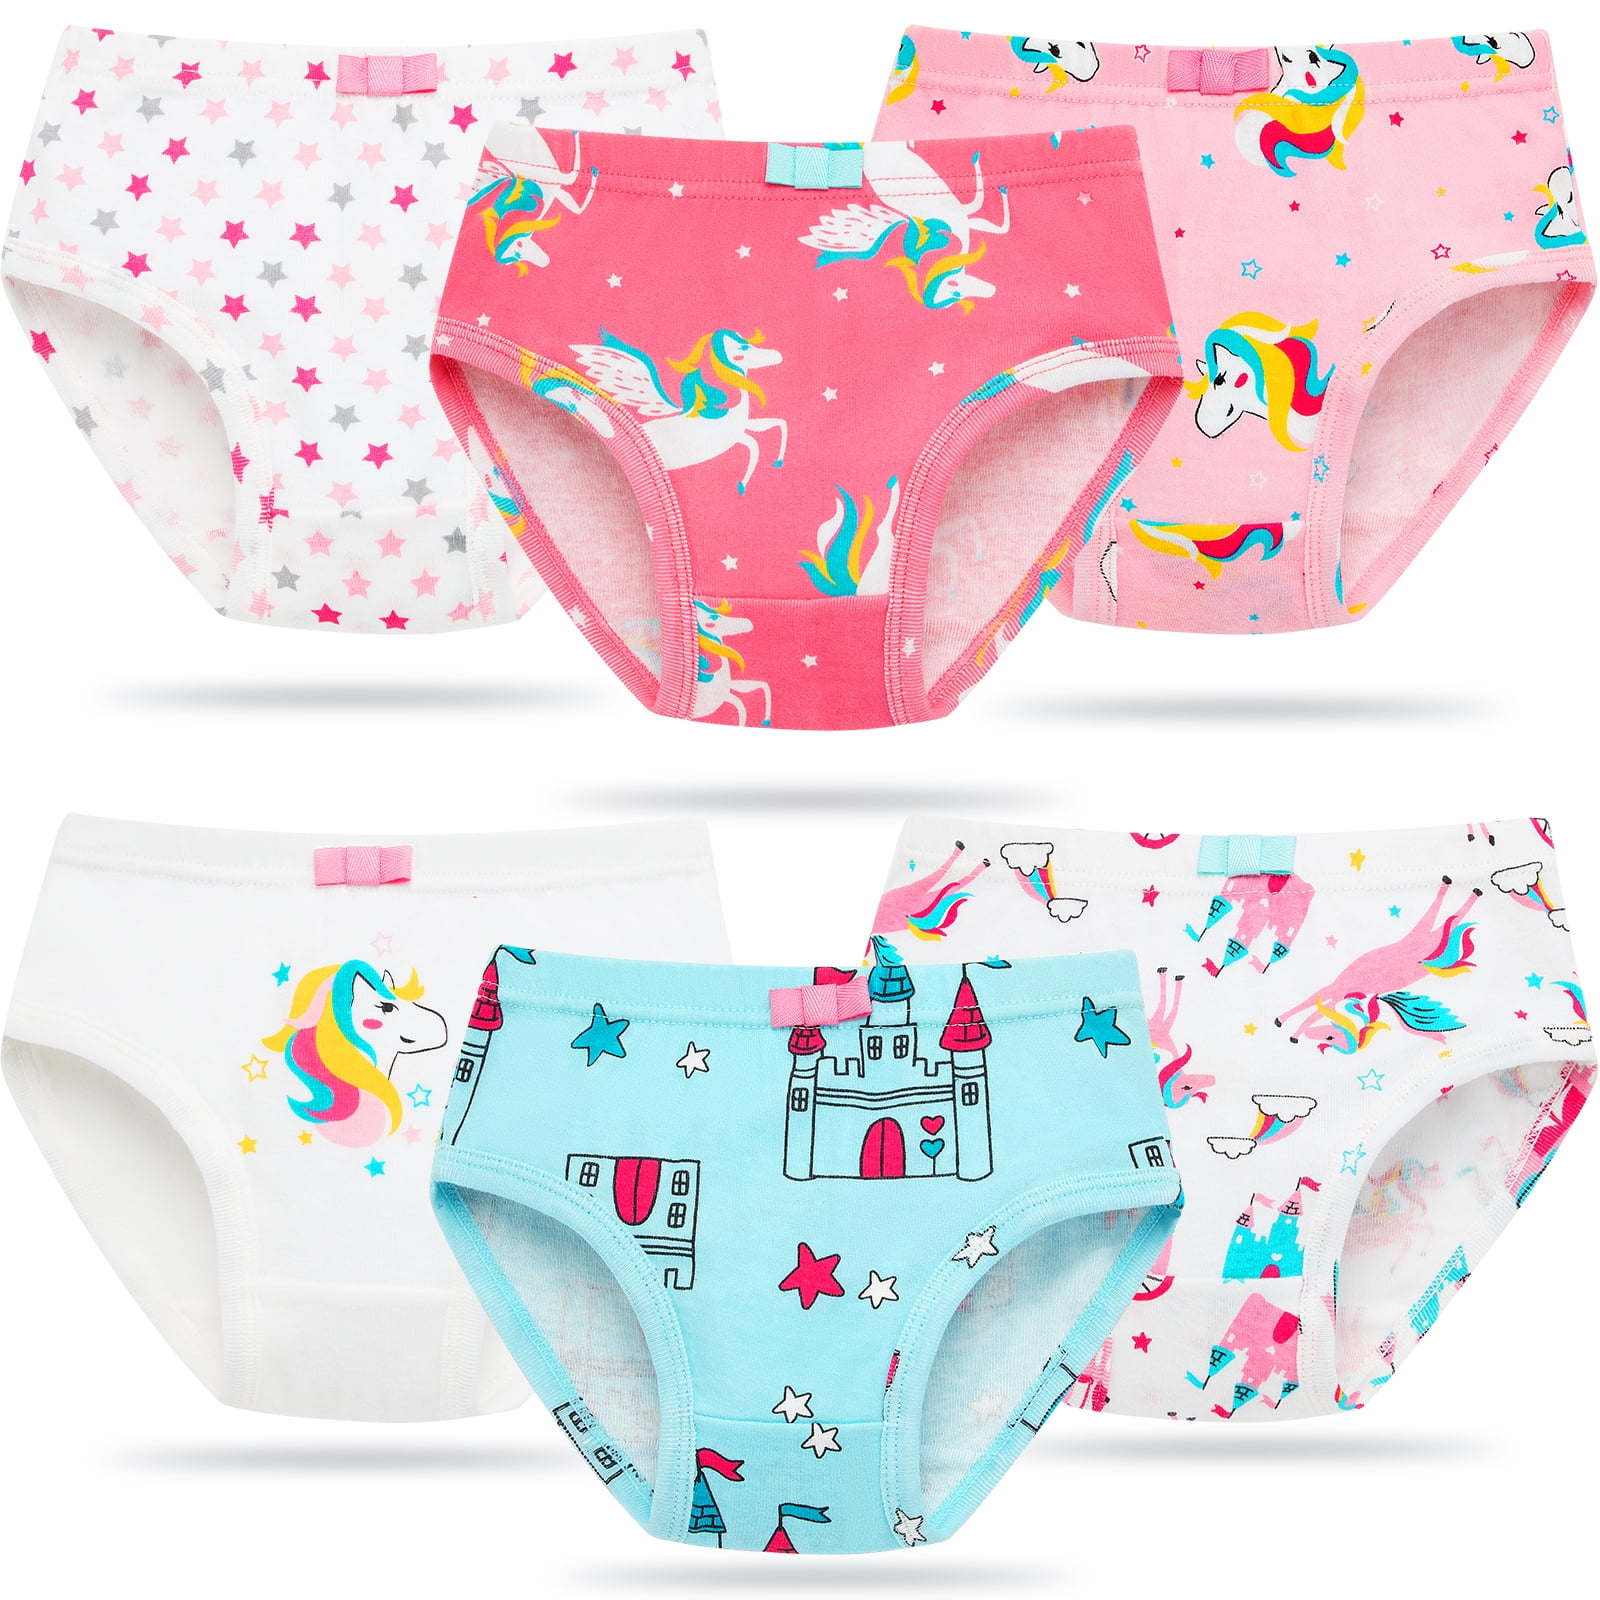 Jeccie 6 Packs Girls Underwear 100% Cotton Breathable Comfort Panties for  Little Girls 6-7 Years - Unicorn,Castle,Stars 